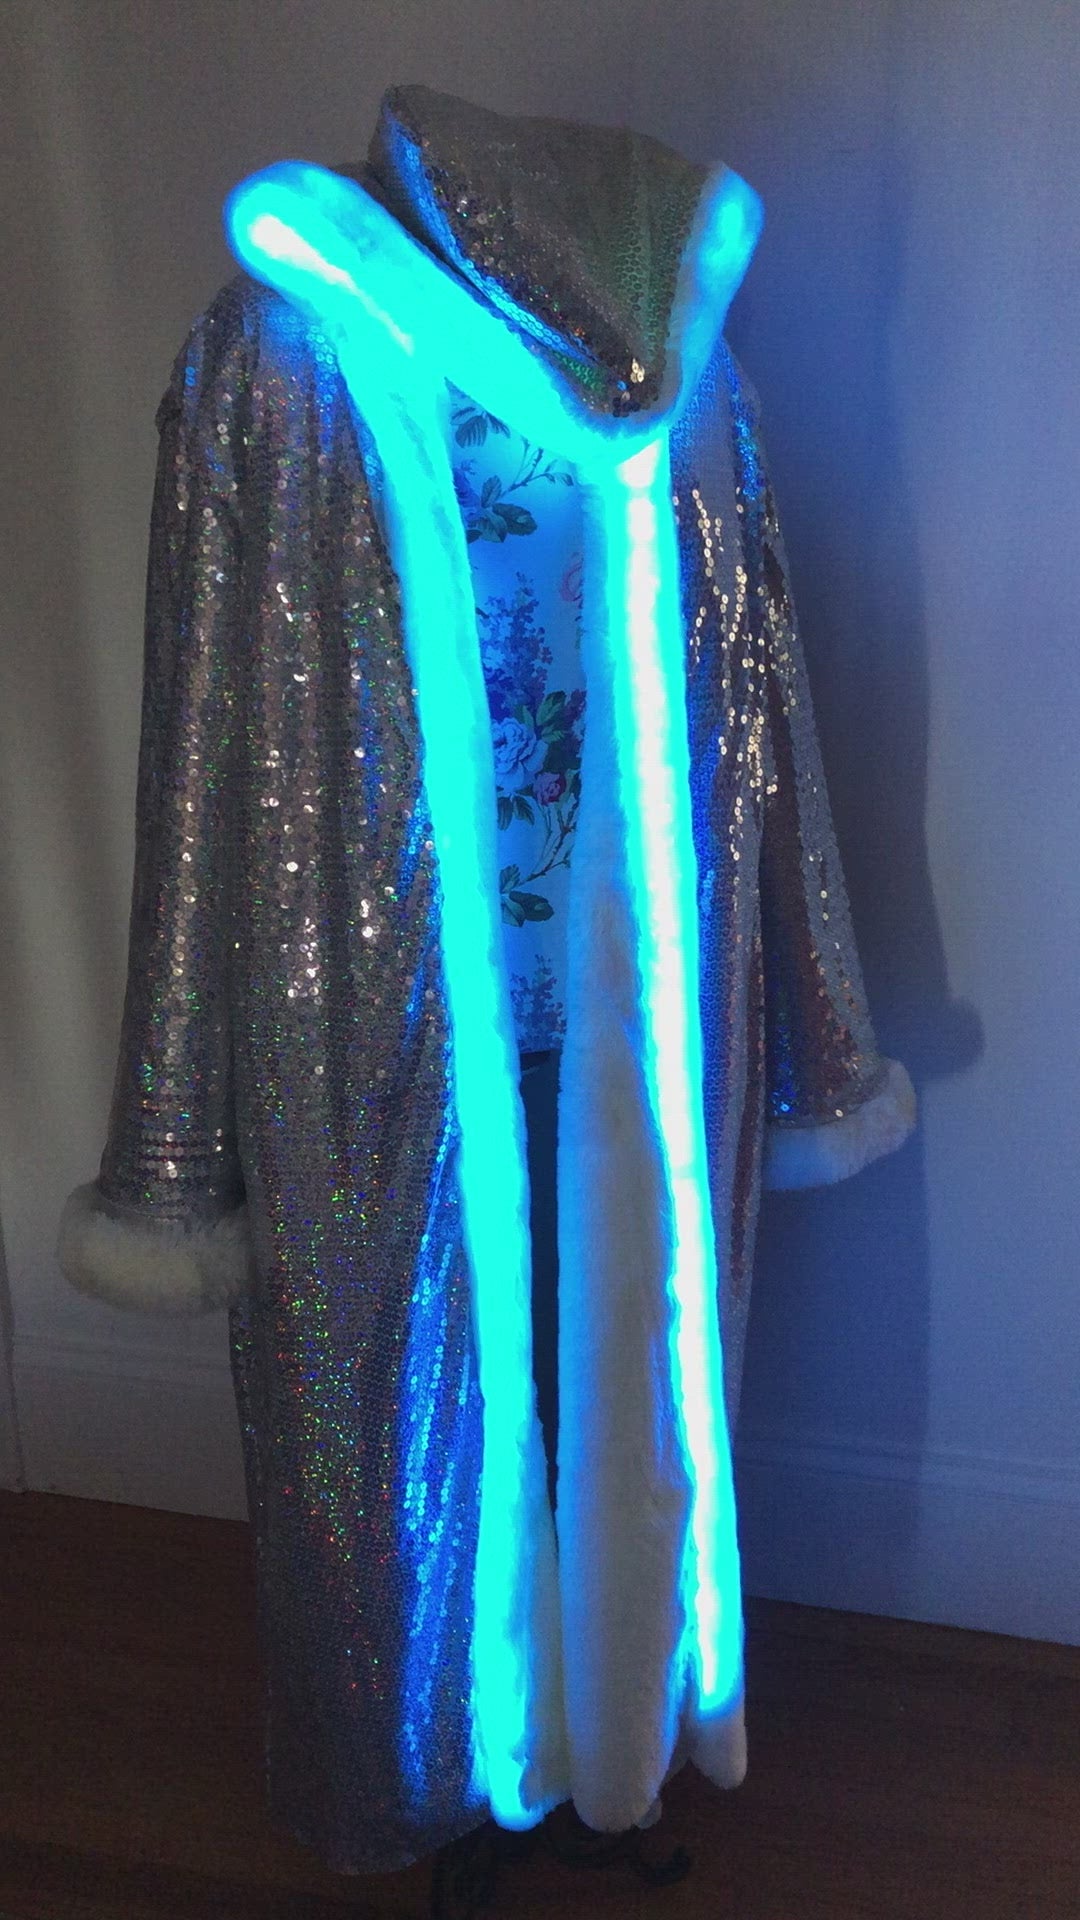 LED Light up Jacket with holographic silver sequins and faux fur for Festival Wear by Love Khaos Festival Clothing